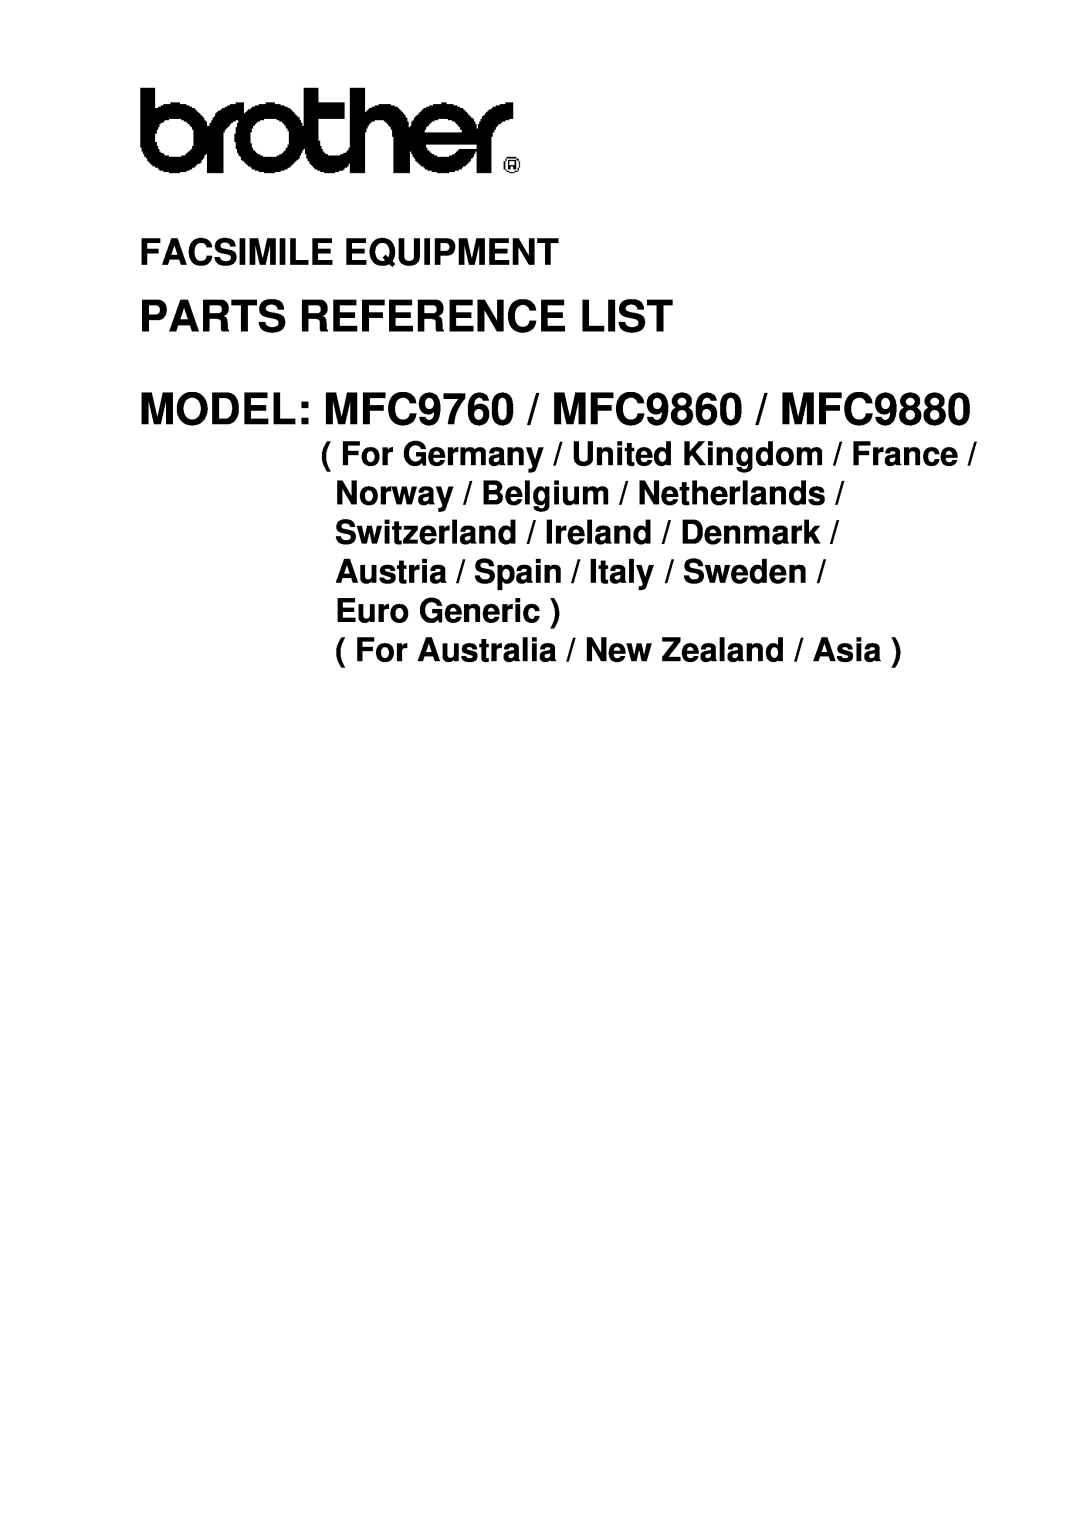 Brother manual PARTS REFERENCE LIST MODEL MFC9760 / MFC9860 / MFC9880, Facsimile Equipment 